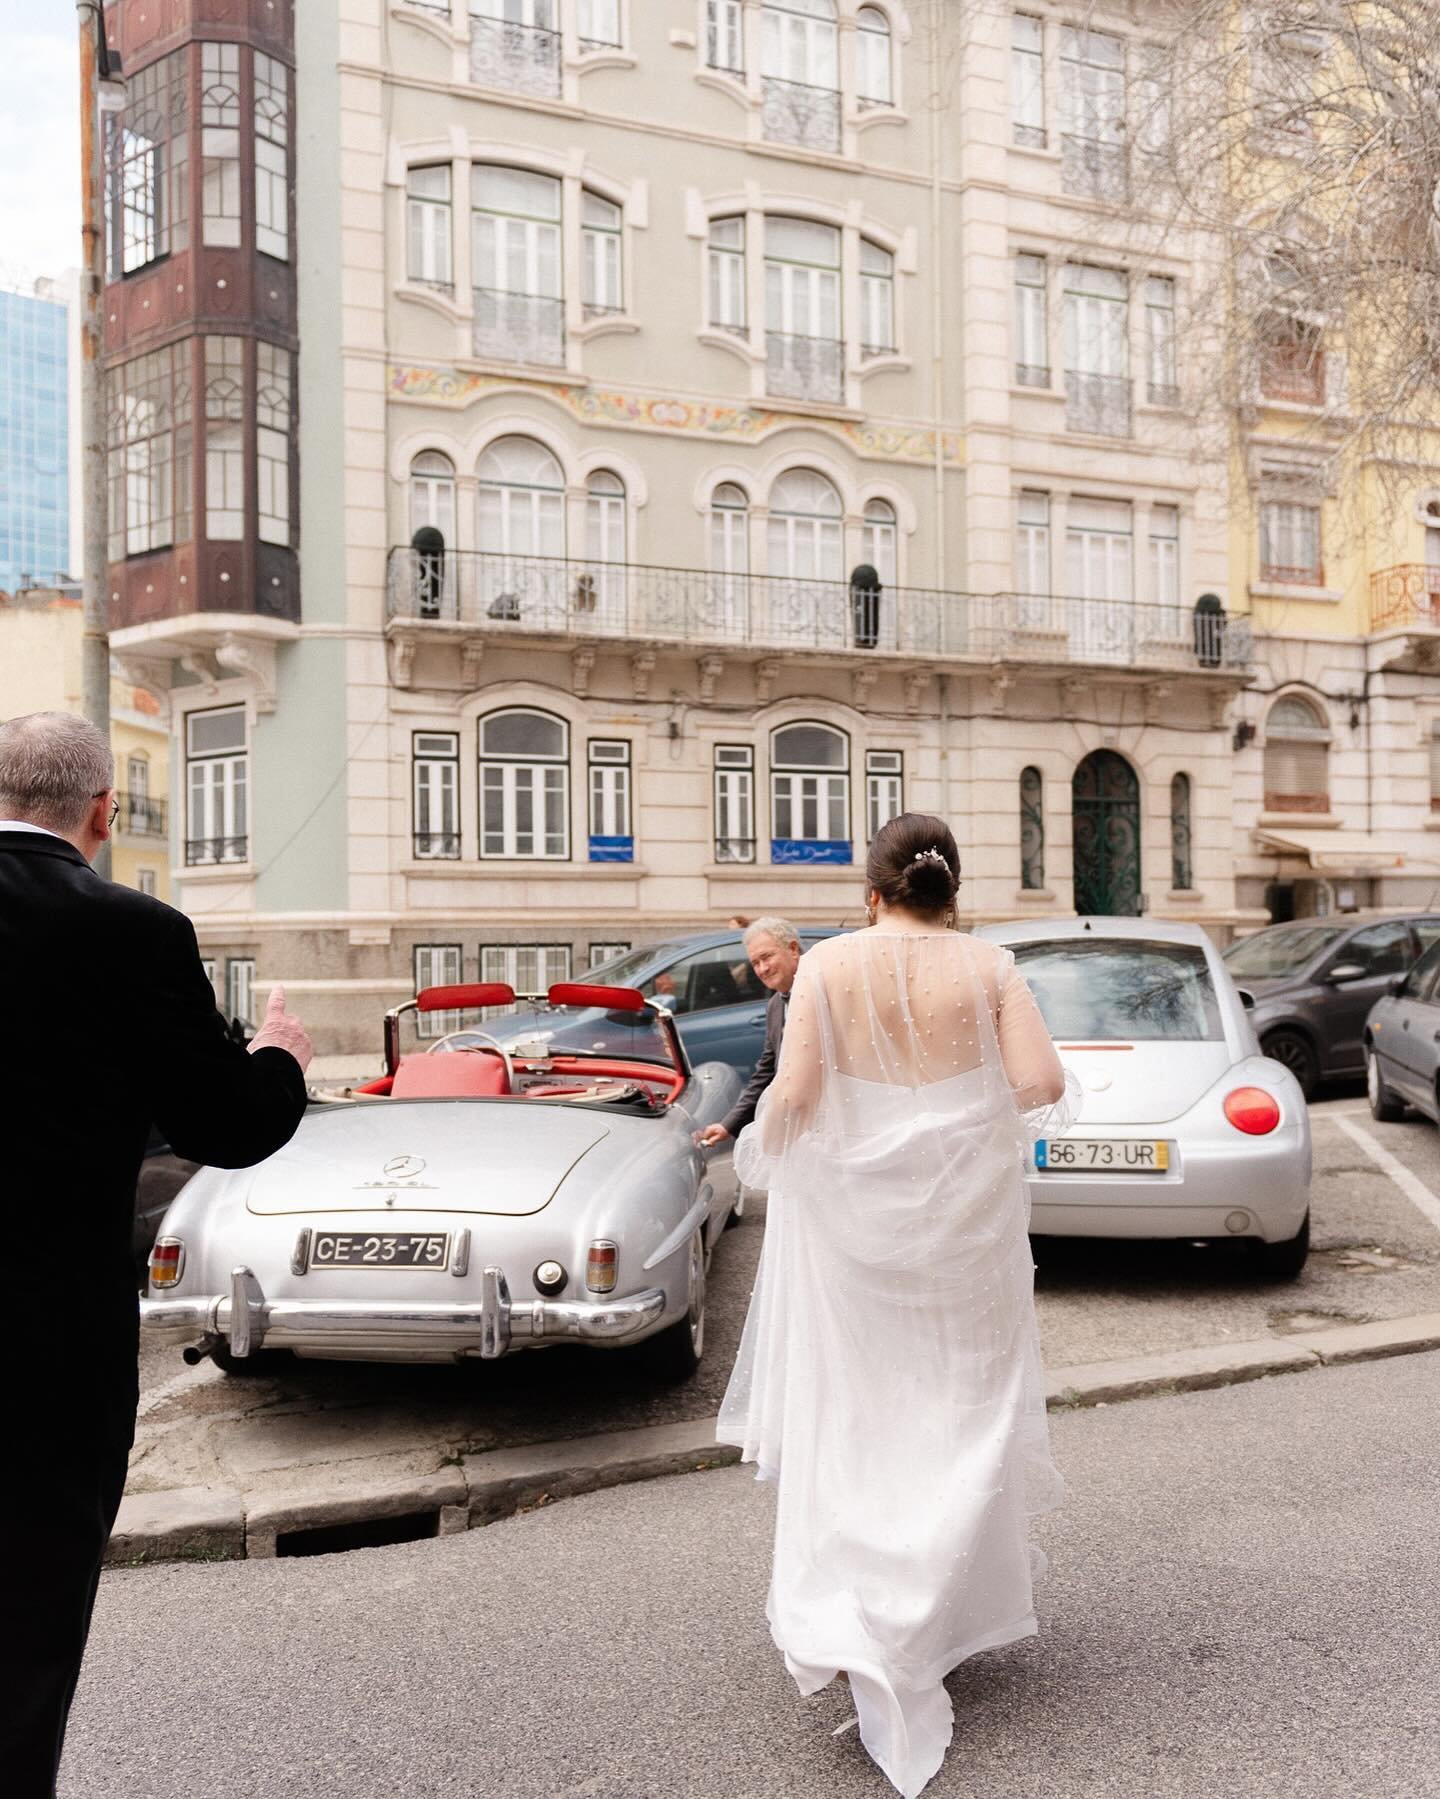 Amalia in Lisbon // on the way to the ceremony in a vintage Mercedes convertible 🤍

Photography: @elizabethpishalphoto
Planning: @events.somethingborrowed
Videography: @vanessaivofilms
Stationery: @inloveweddings
Florals: @martinsalvesdecoracoes
Mak